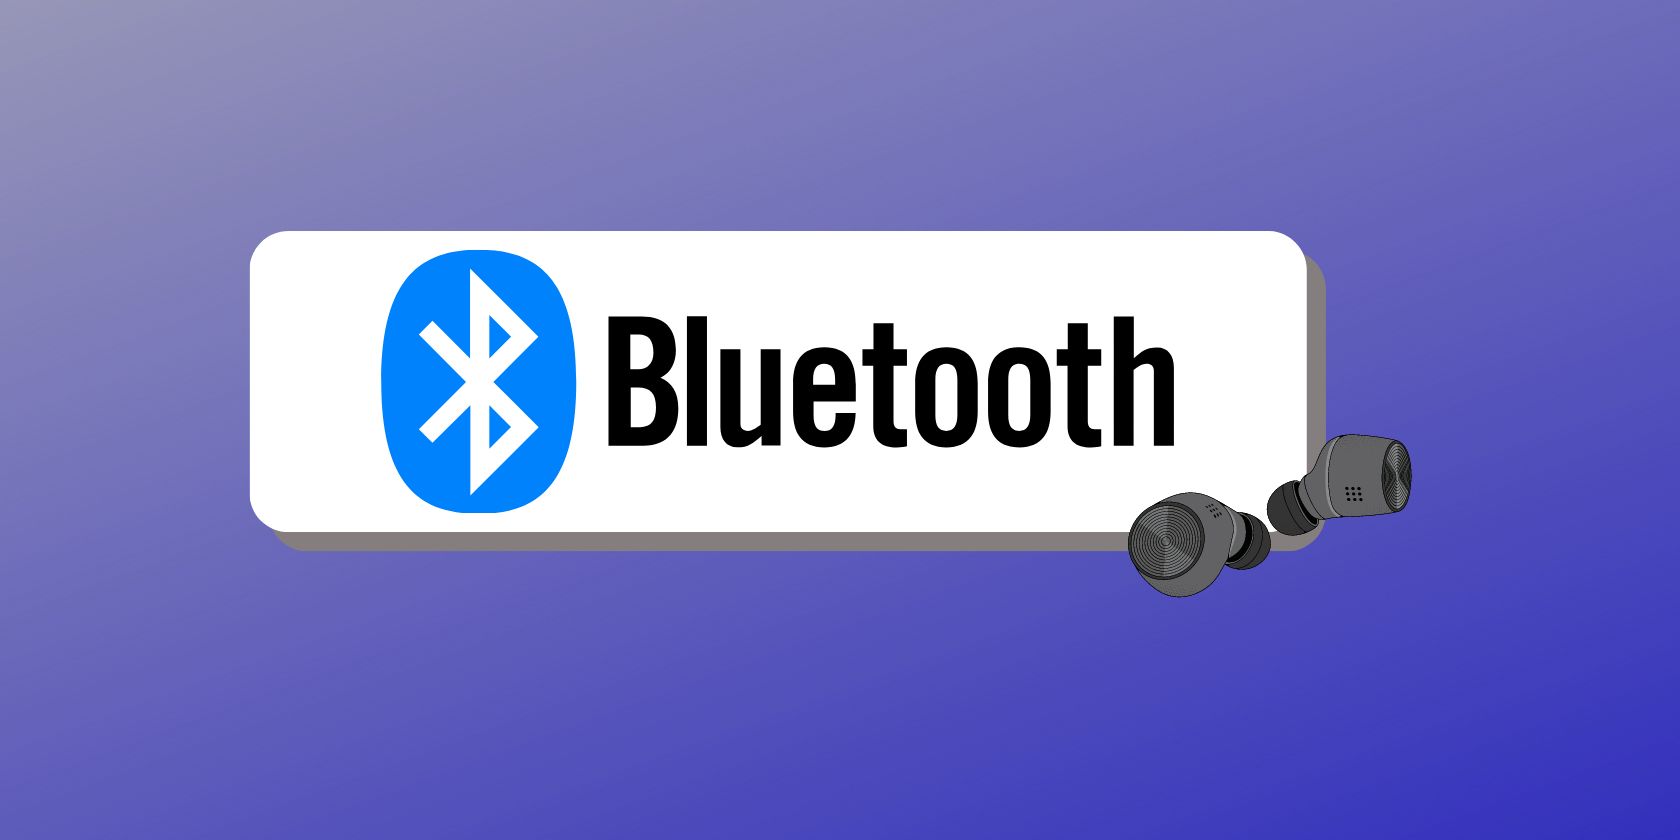 An infographic showing the bluetooth logo and a pair of earphones